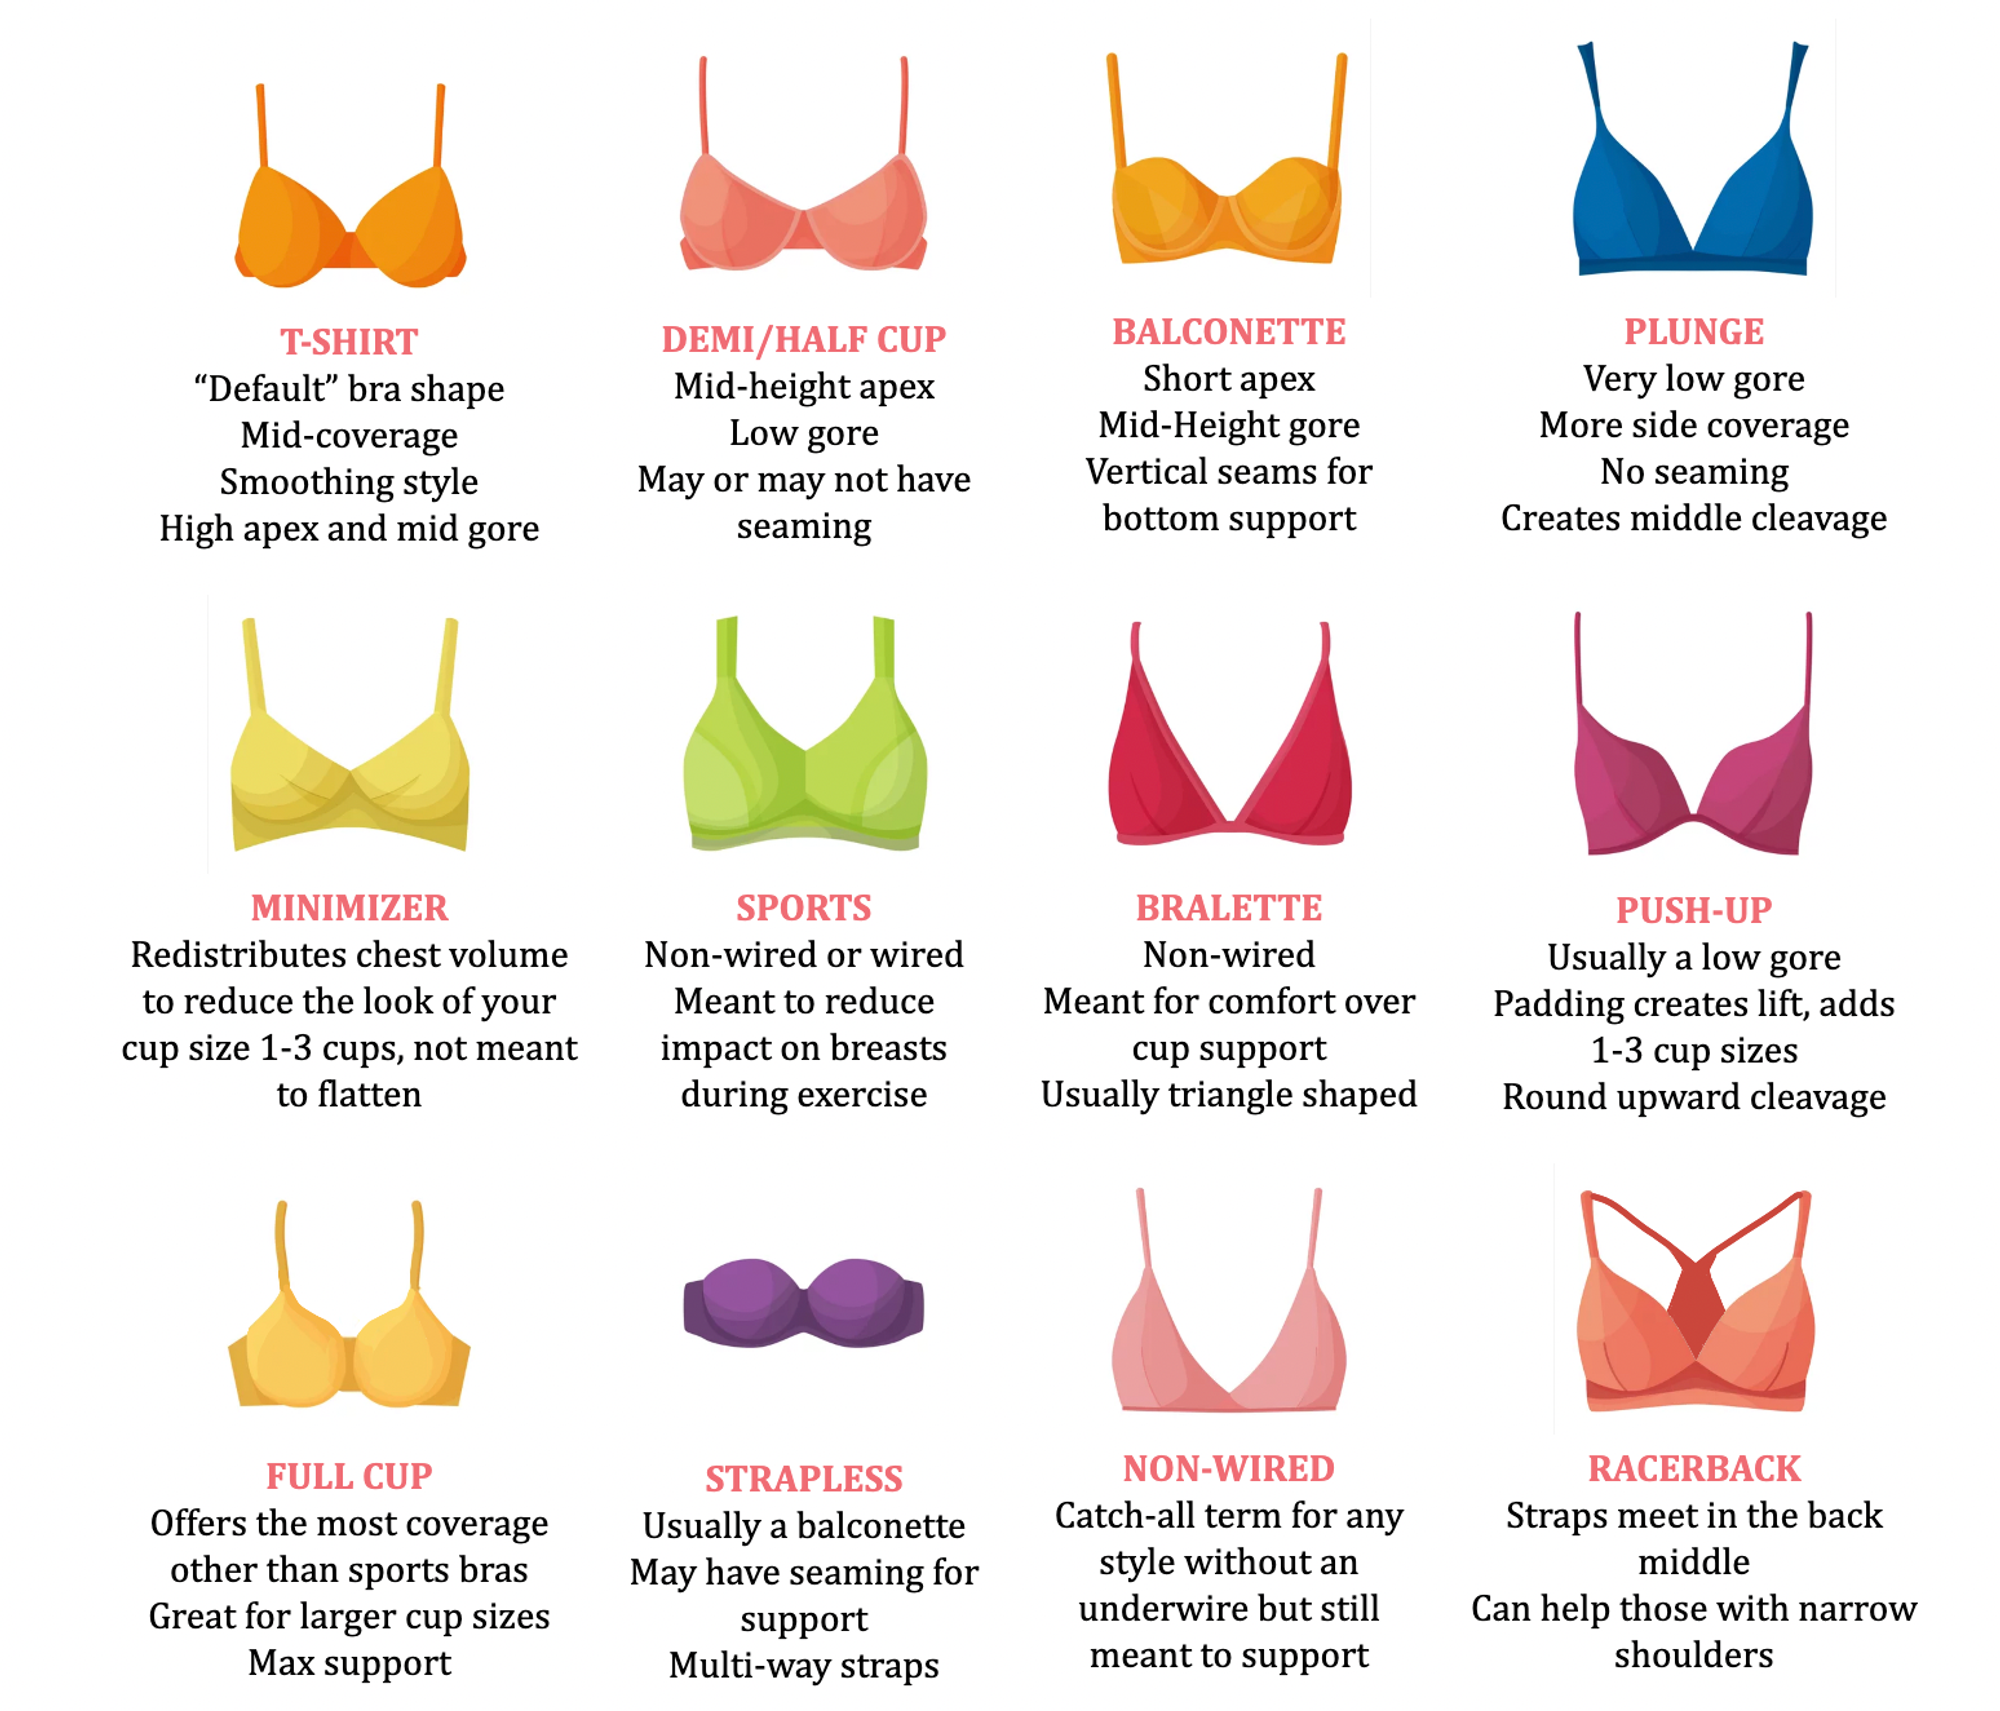 How a Bra's Center Panel (or Gore) Should Fit - HerRoom 